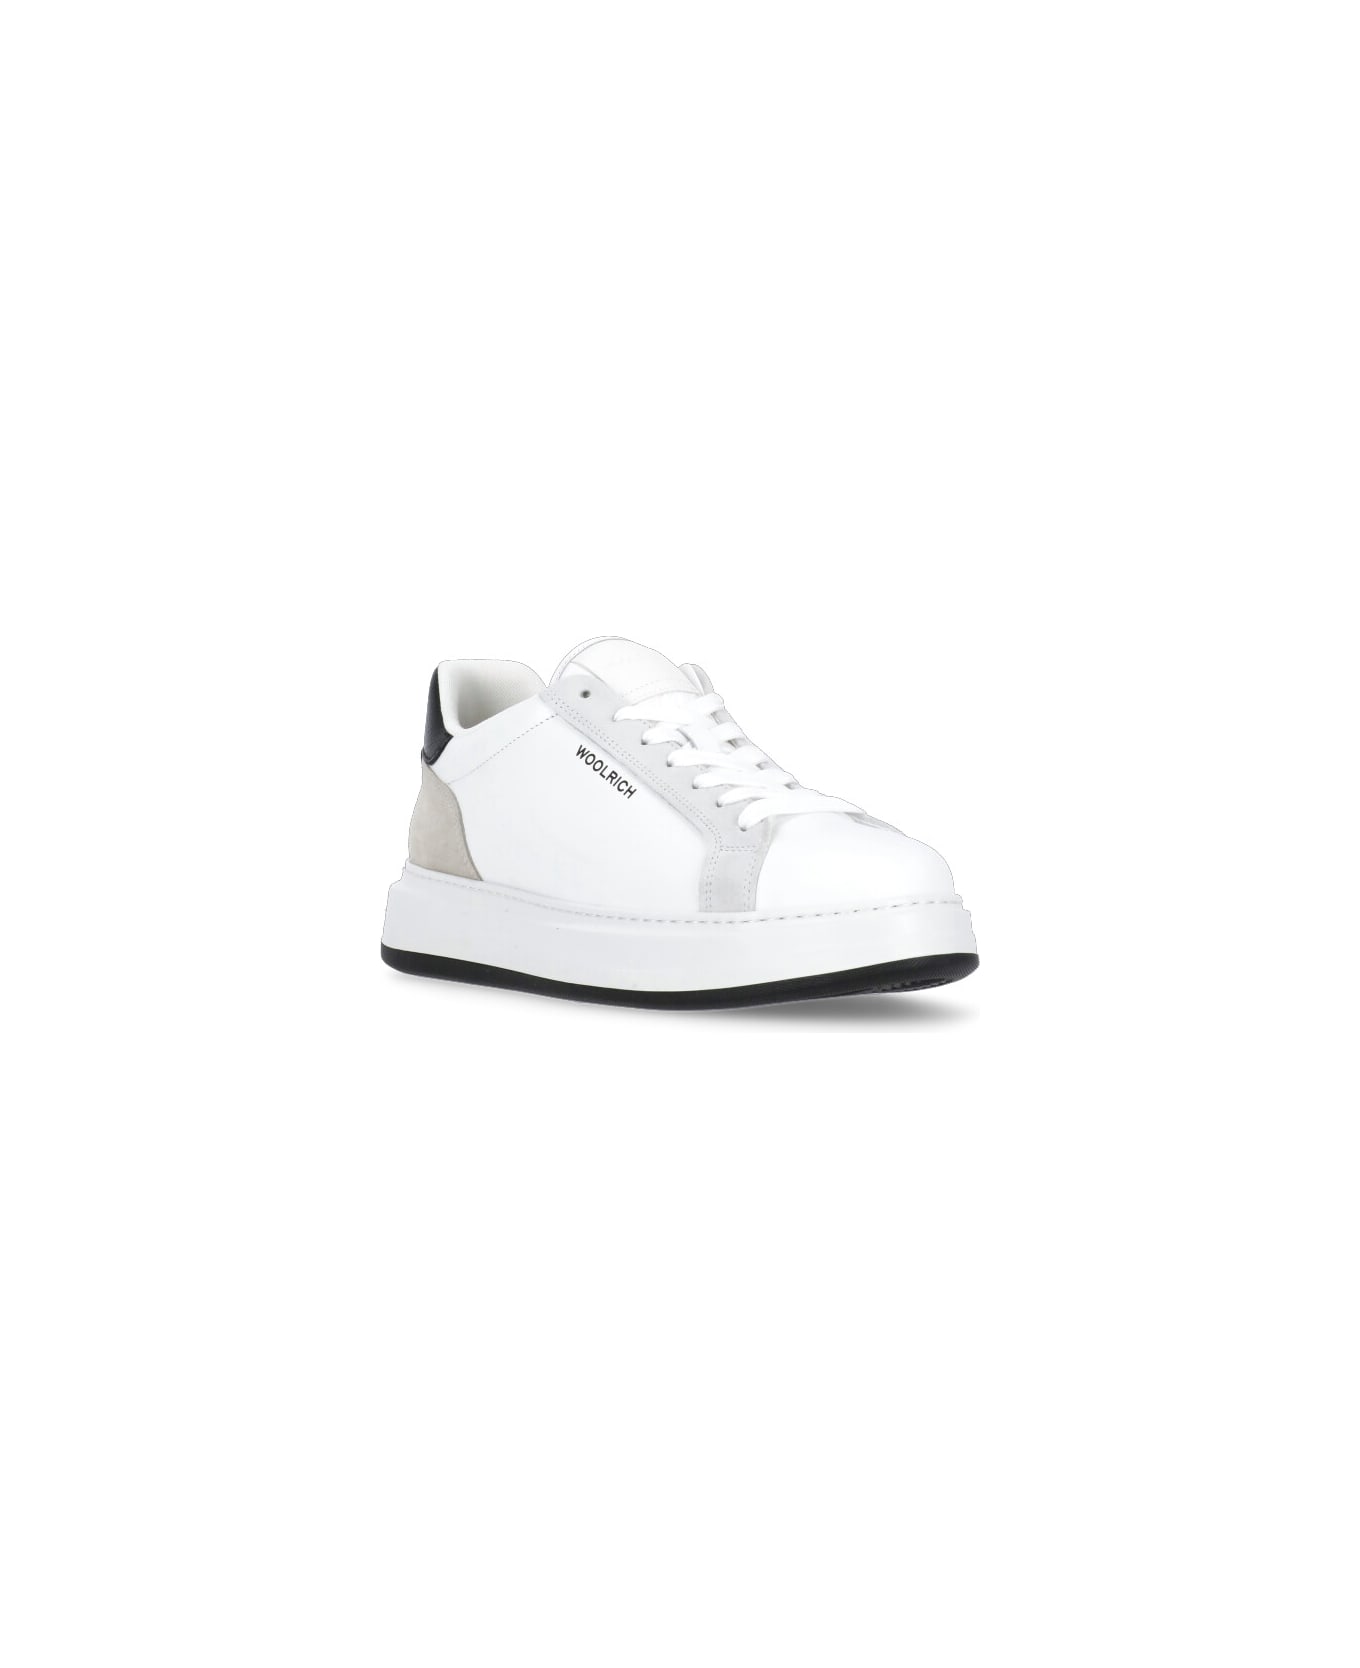 Woolrich 'arrow' Leather Sneakers - White スニーカー